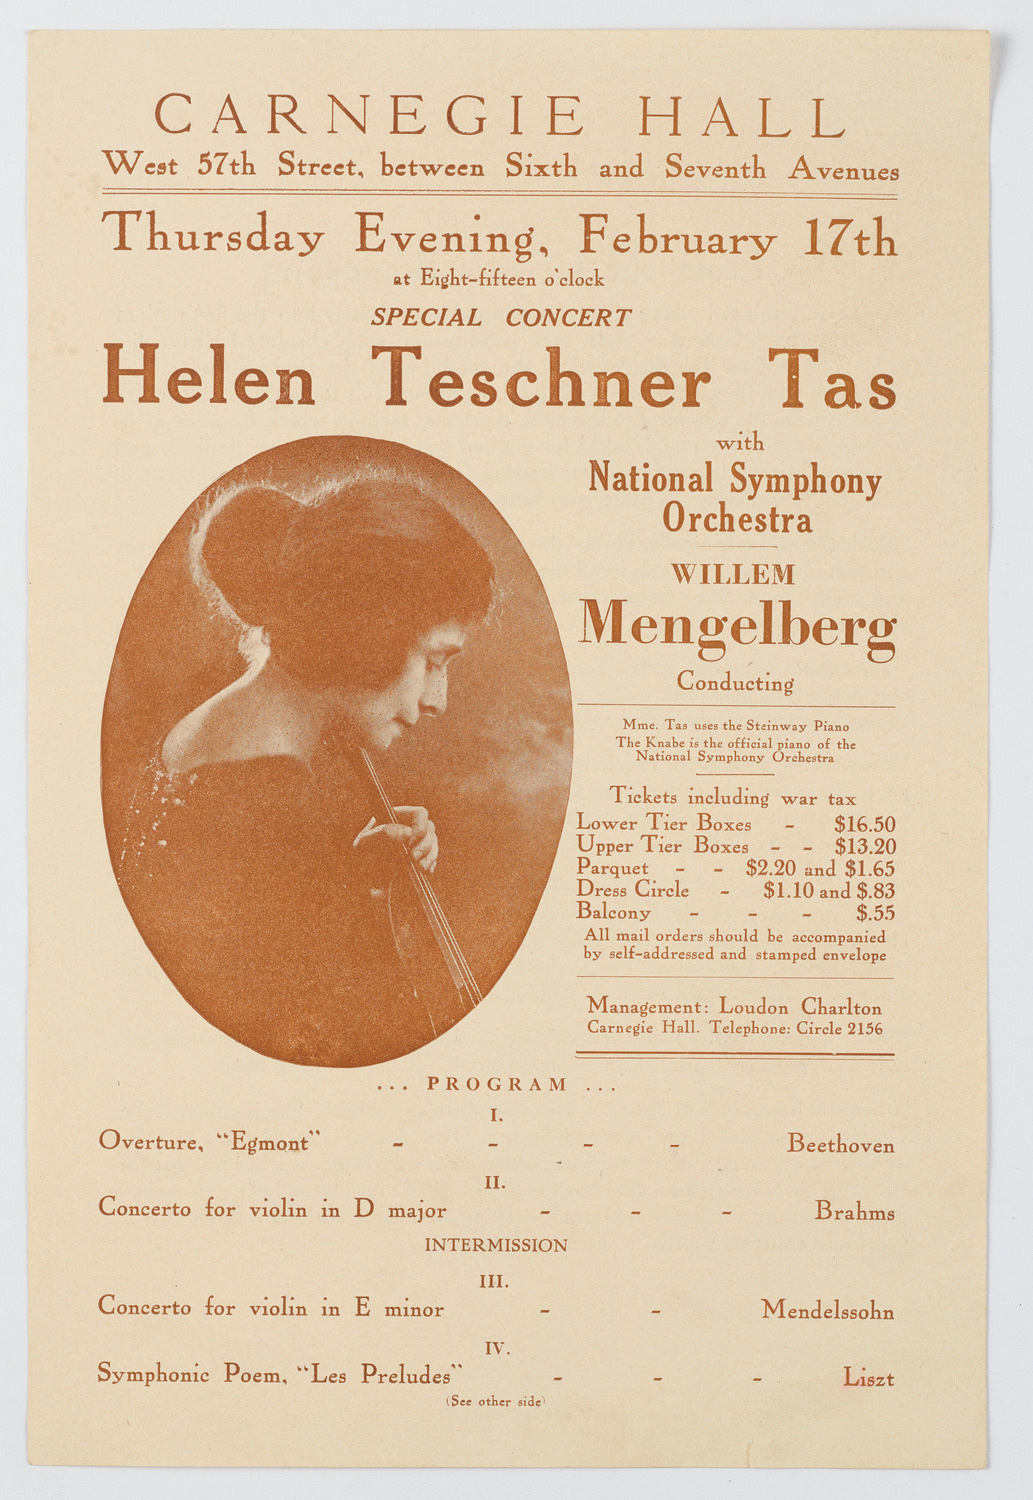 Helen Teschner Tas with the National Symphony Orchestra, February 17, 1921